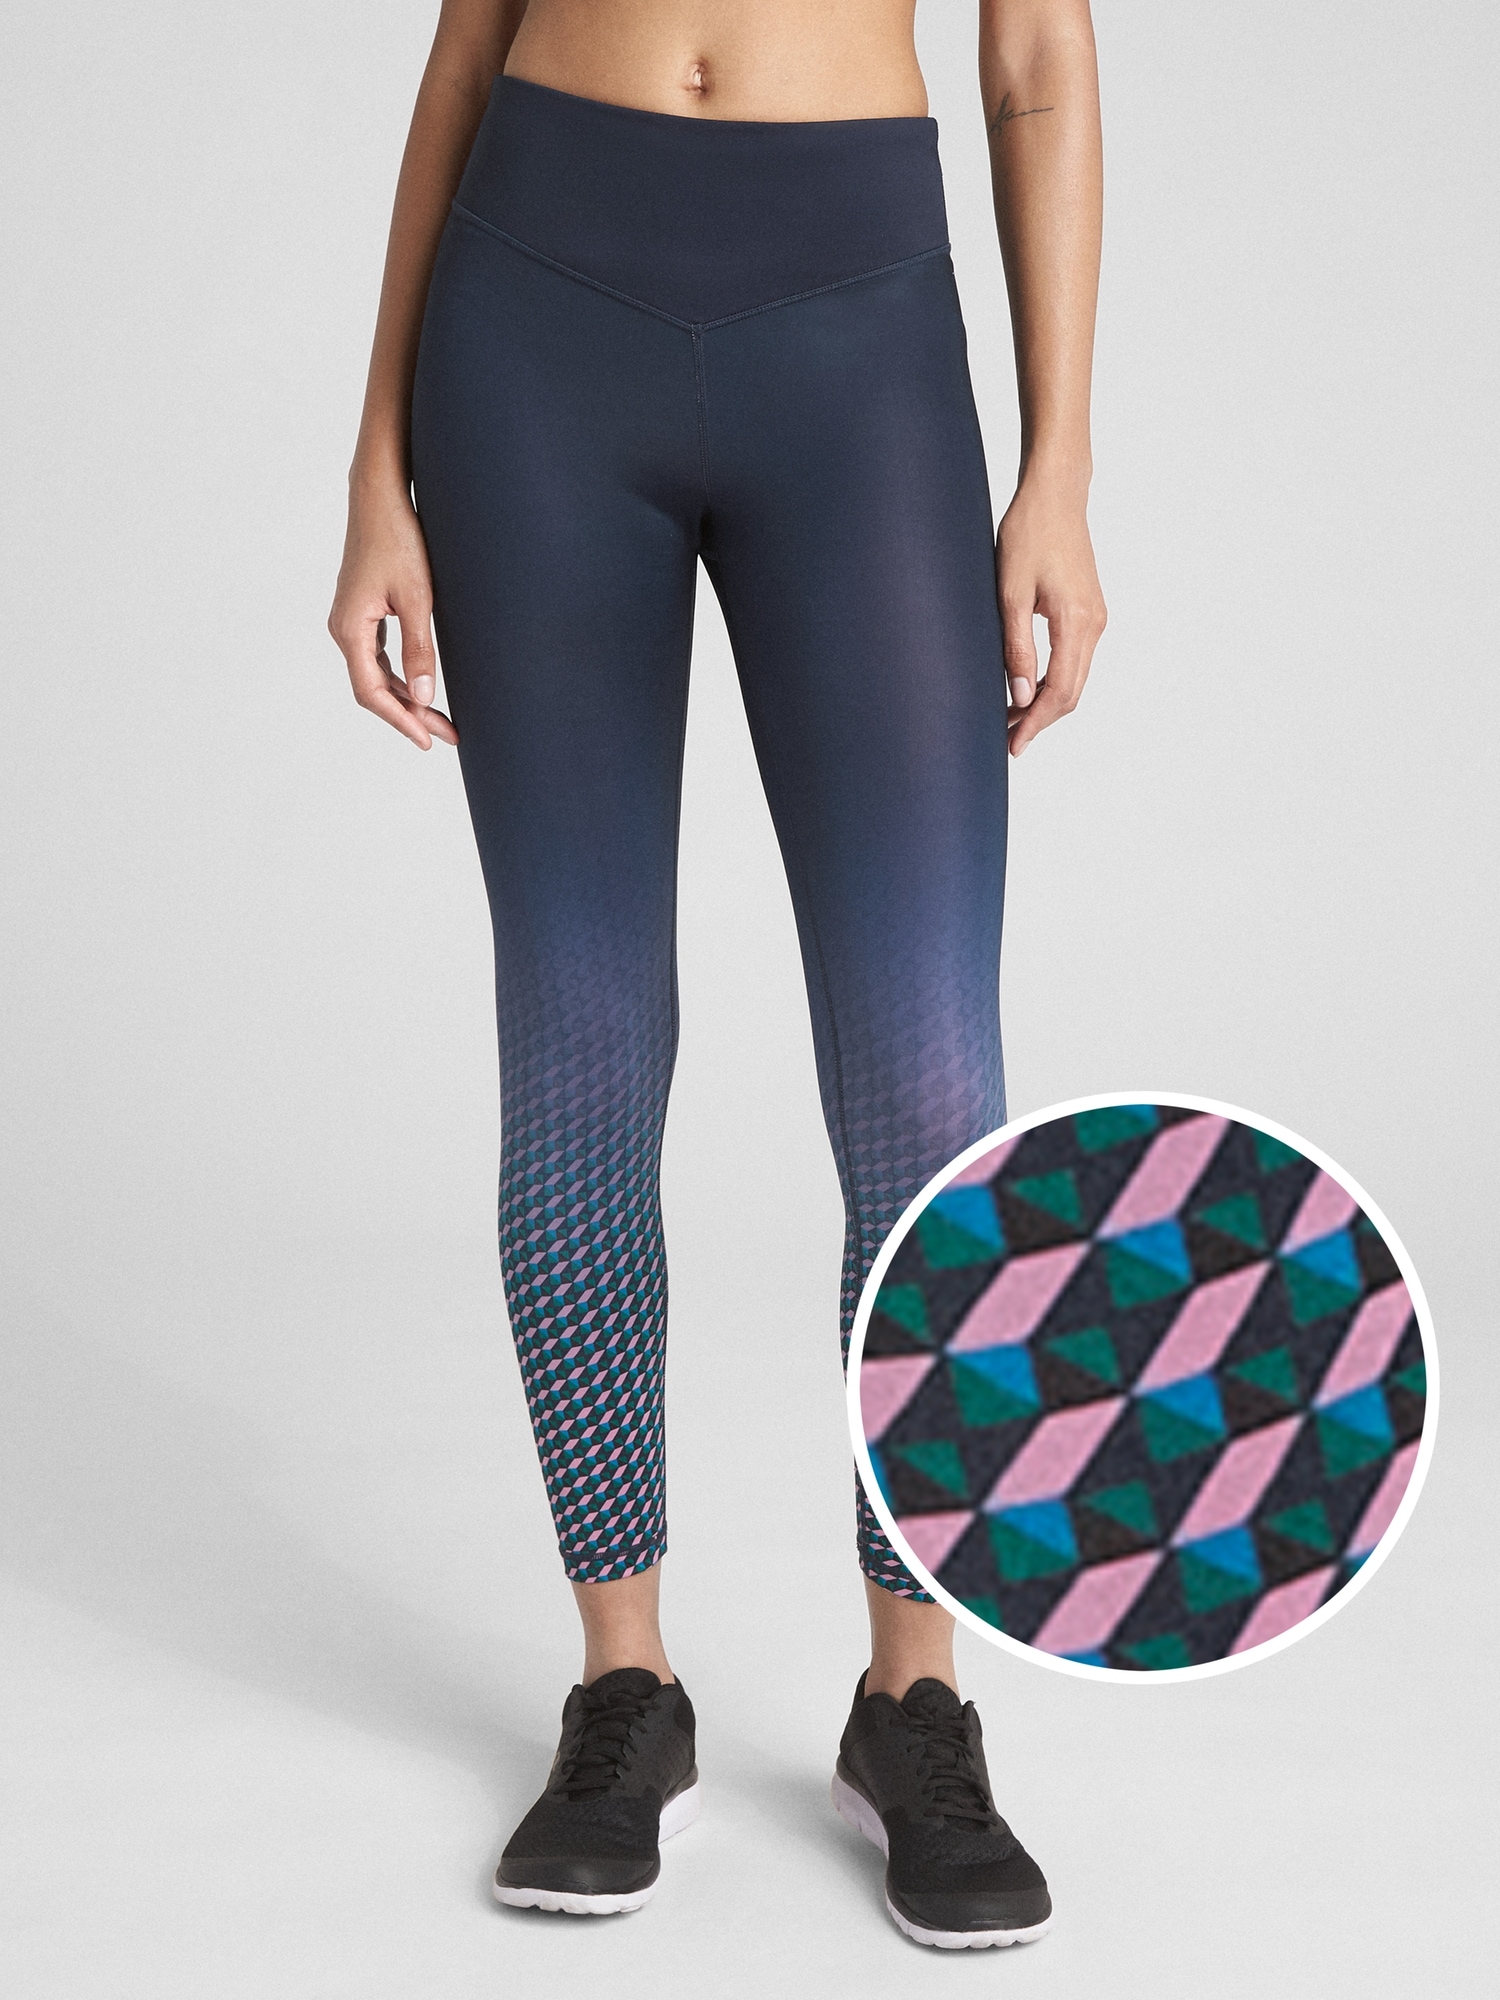 Blue Ombre Diamond Pattern Leggings with pockets